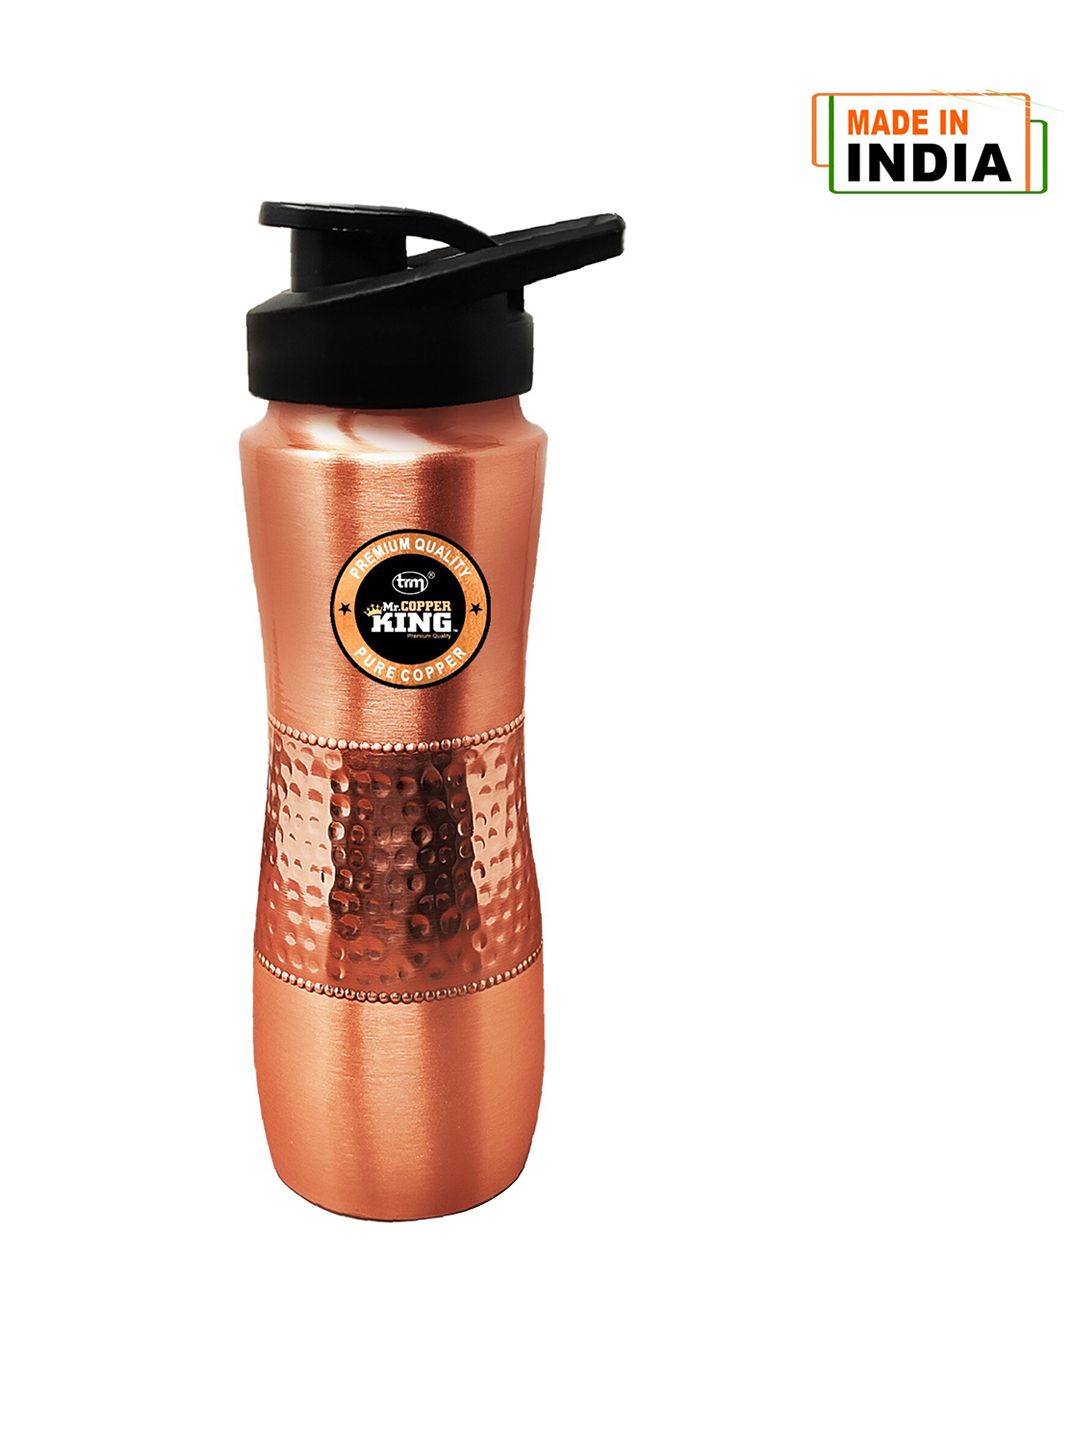 MR. COPPER KING Copper-Toned & Black Solid Pure Copper Water Bottle Price in India